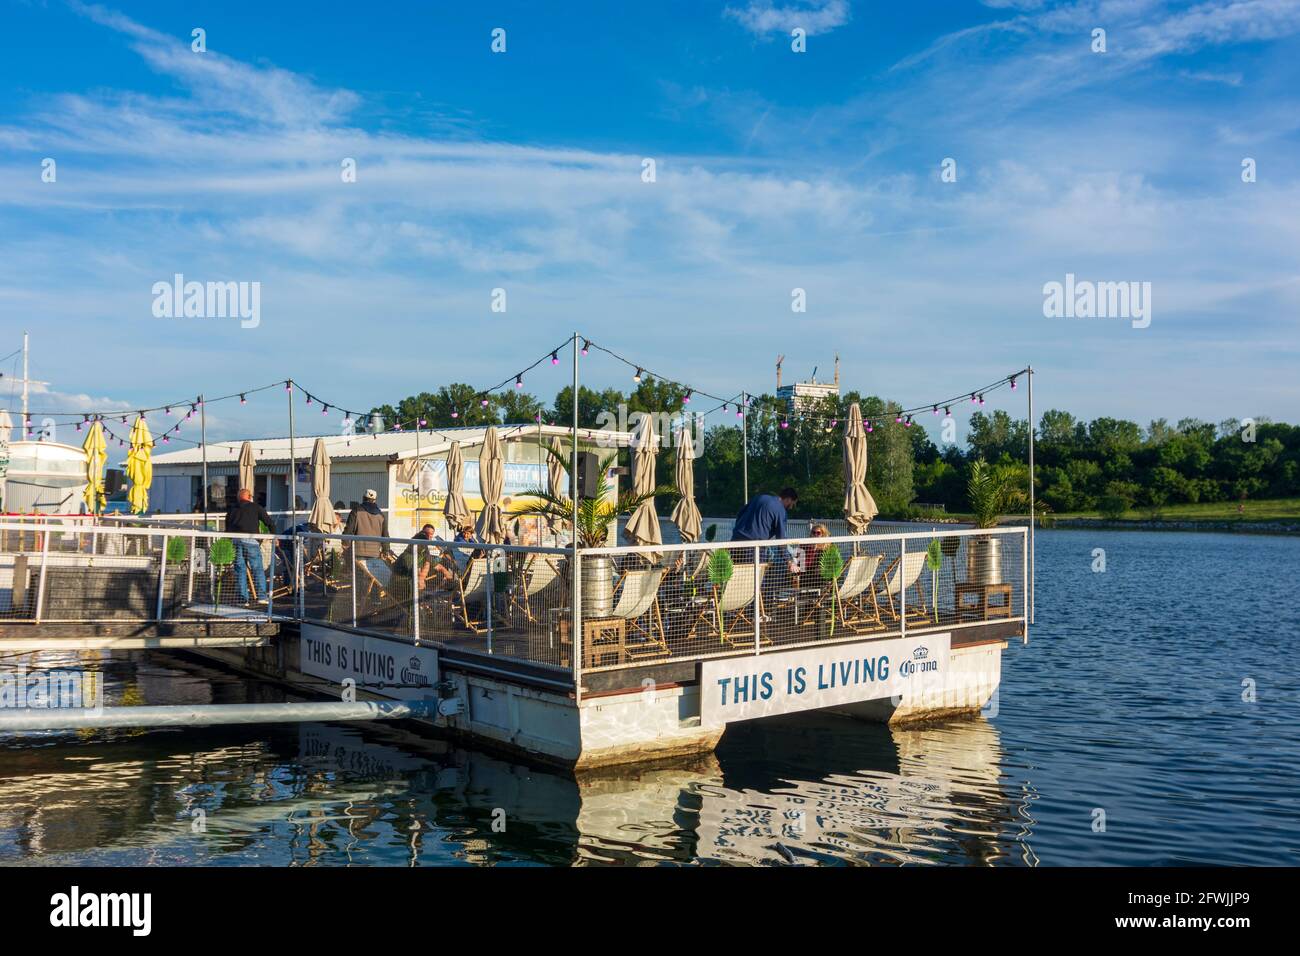 Wien, Vienna: restaurant reopened after closure due to Covid-19, 'This is Living' Corona beer billboard, floating restaurant 'Vienna City Beach Club' Stock Photo